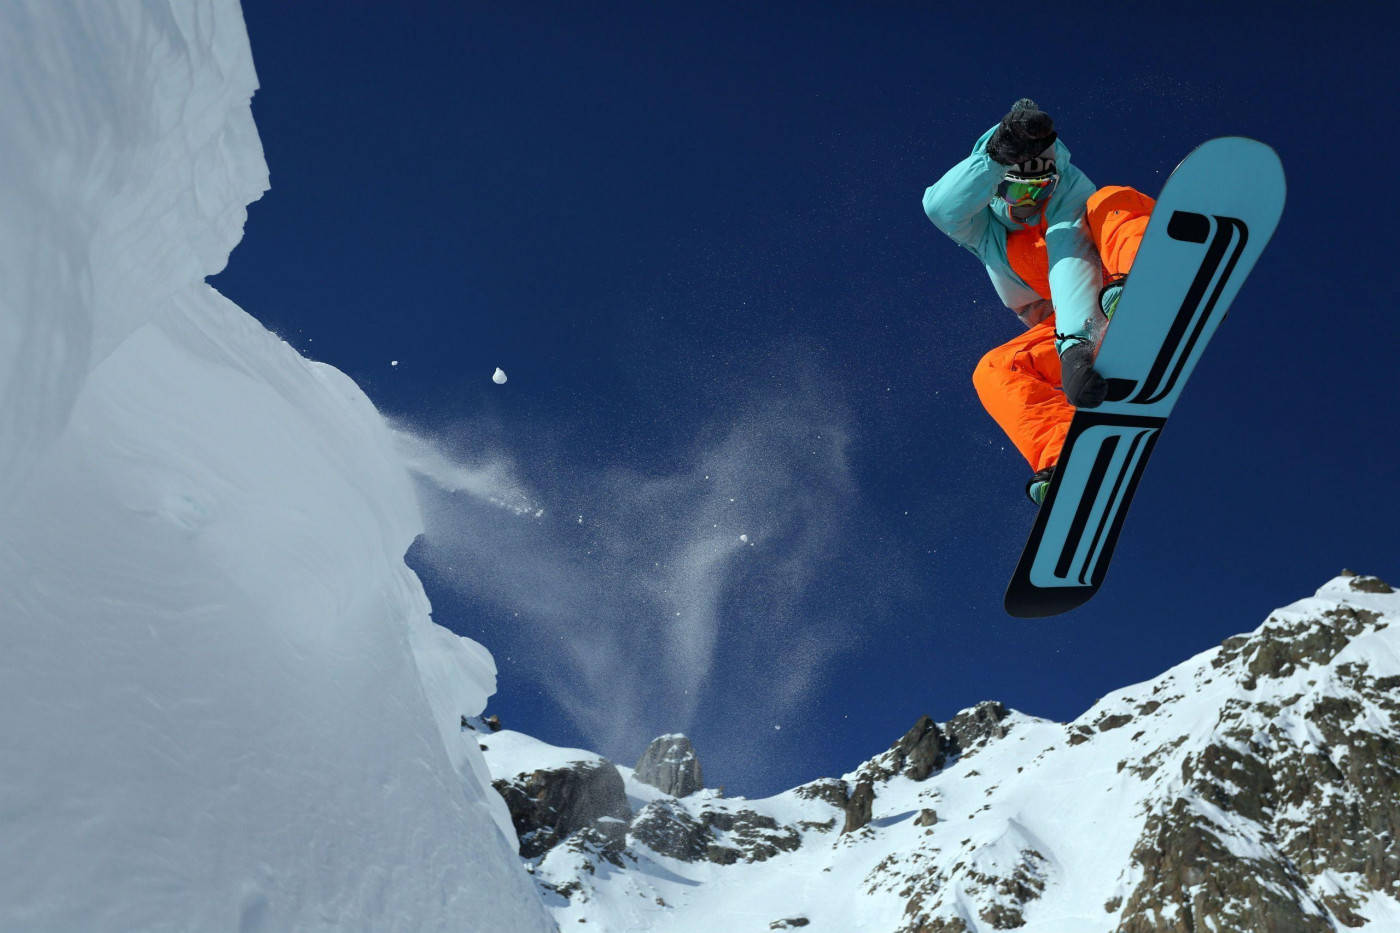 Man In Orange Descending With A Snowboard Picture